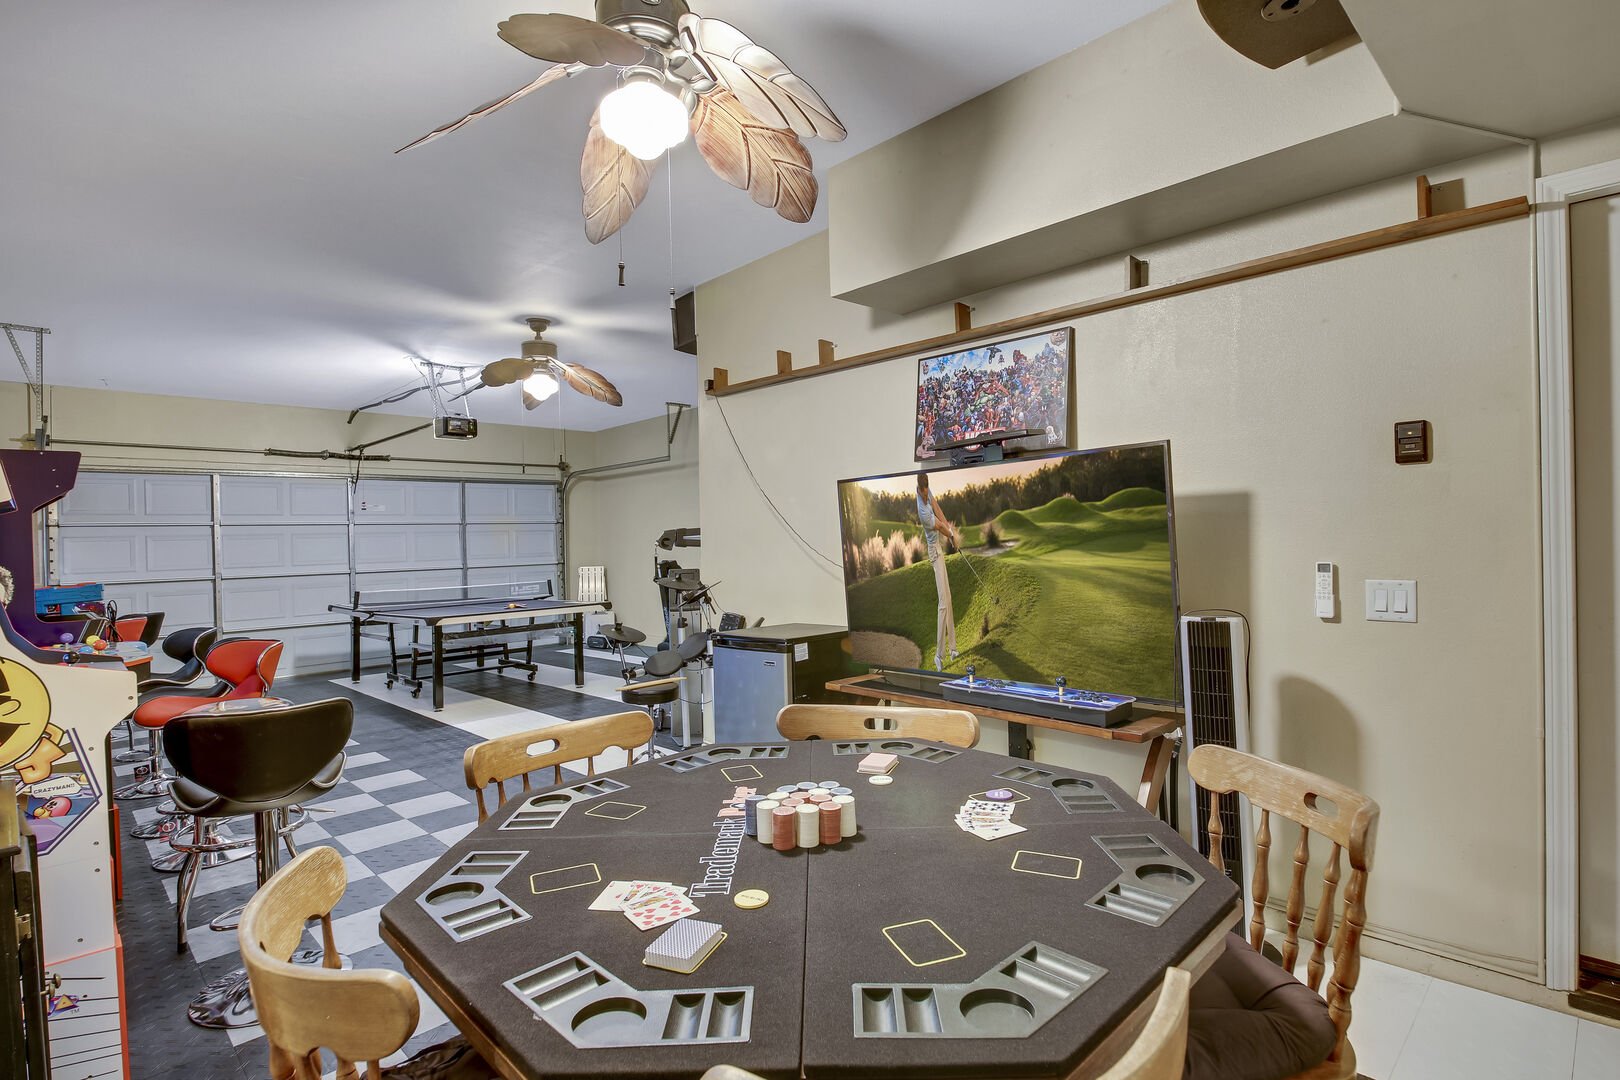 Challenge your poker skills at the table with seating for 5.